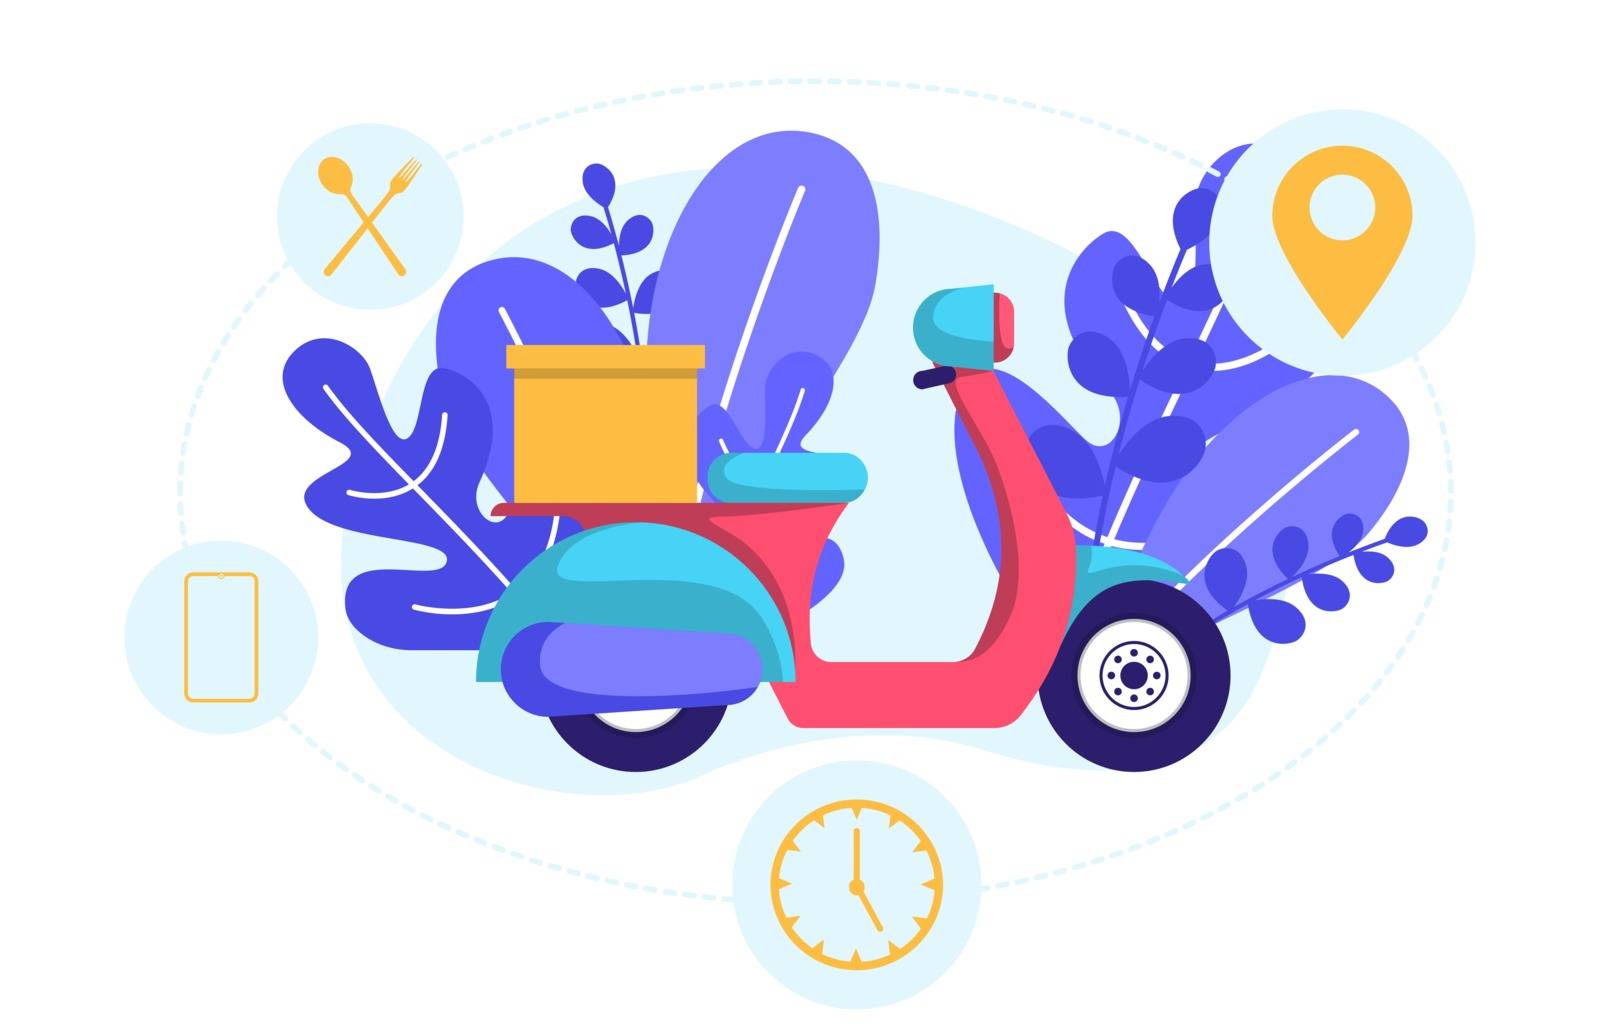 Scooter Motorcycle Delivery Service Food Shipping by Mobile Application by jongcreative